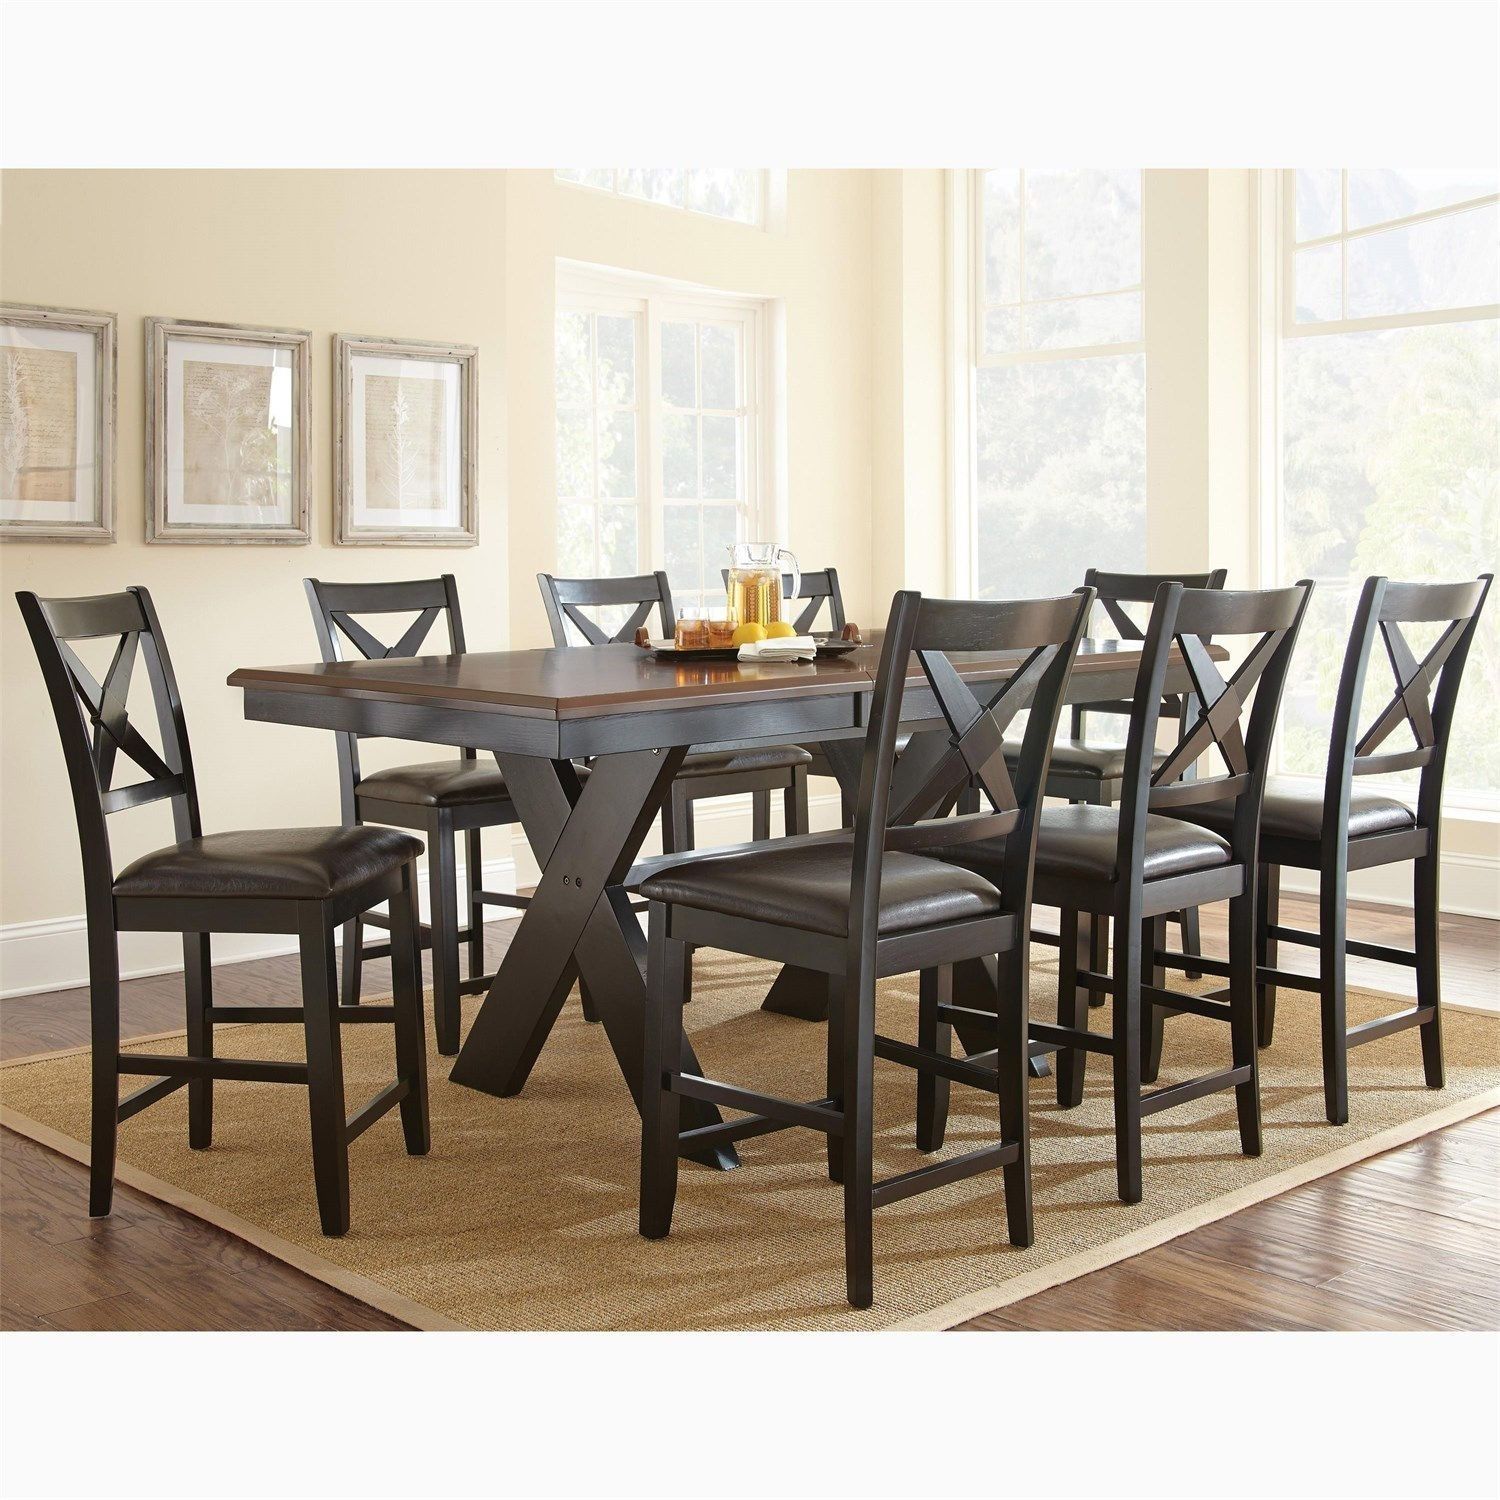 Steve Silver Vl700P Violante Counter Table | Room Inside Most Popular Craftsman 9 Piece Extension Dining Sets (View 4 of 20)